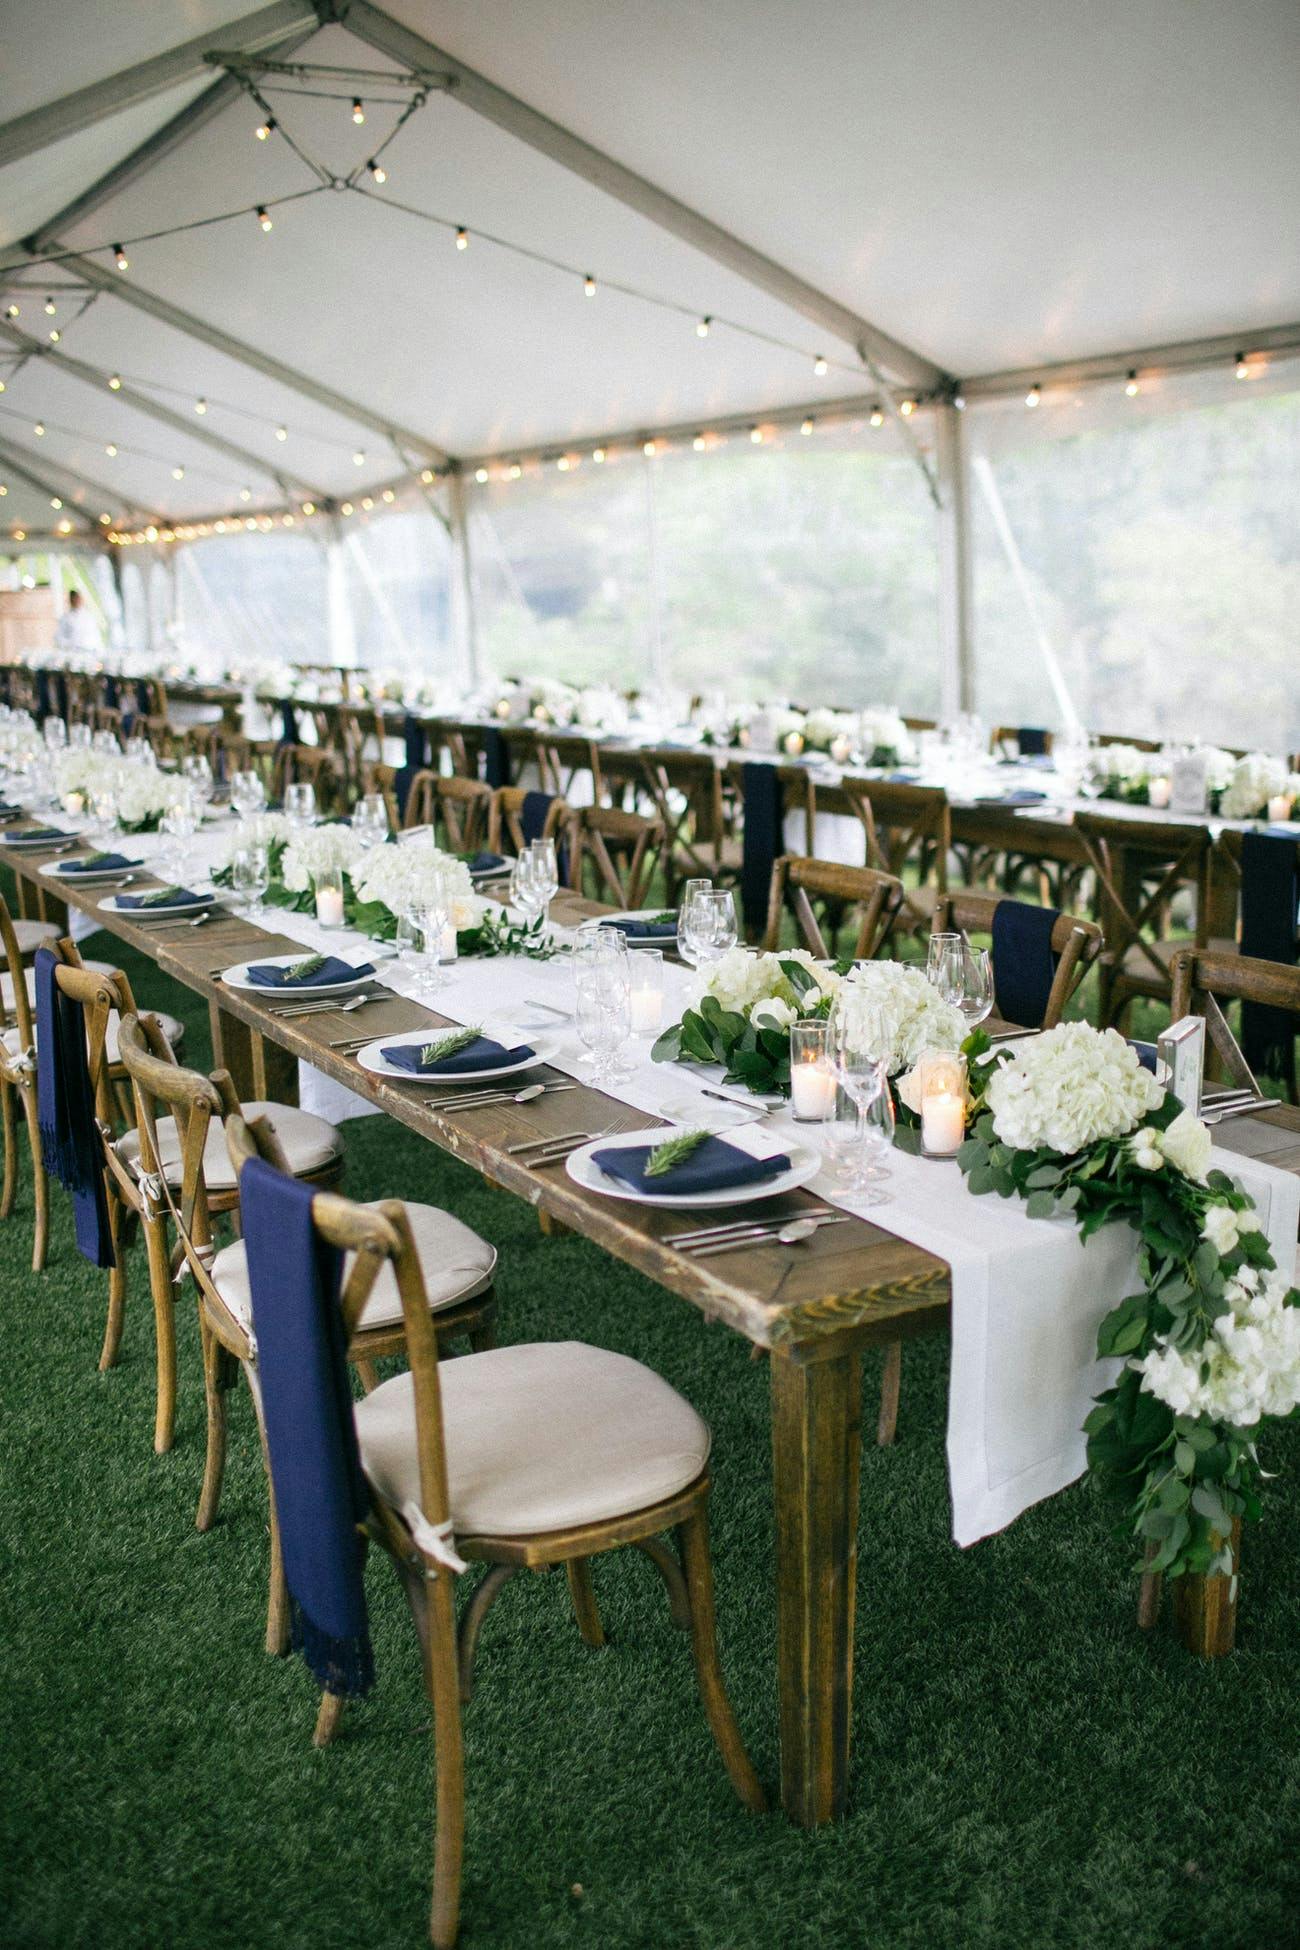 Wedding reception tent and tables with blue chair décor.